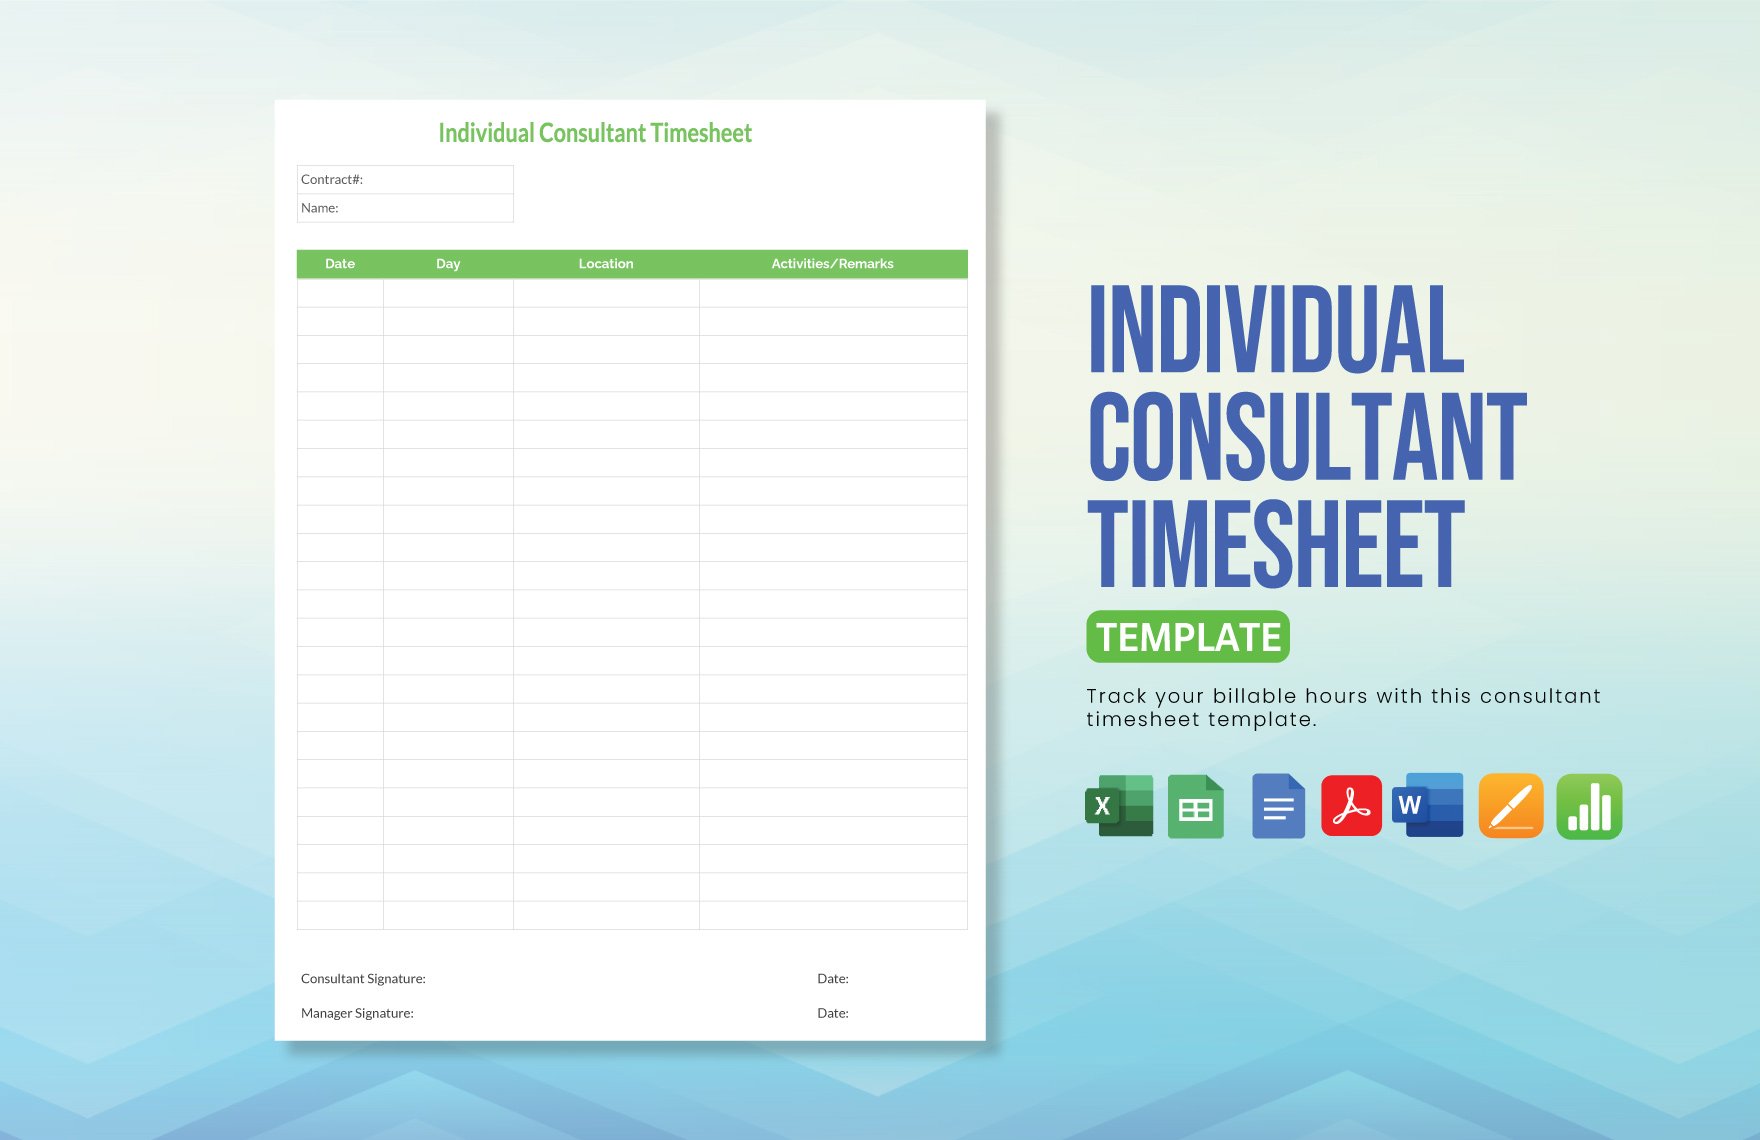 Individual Consultant Timesheet Template